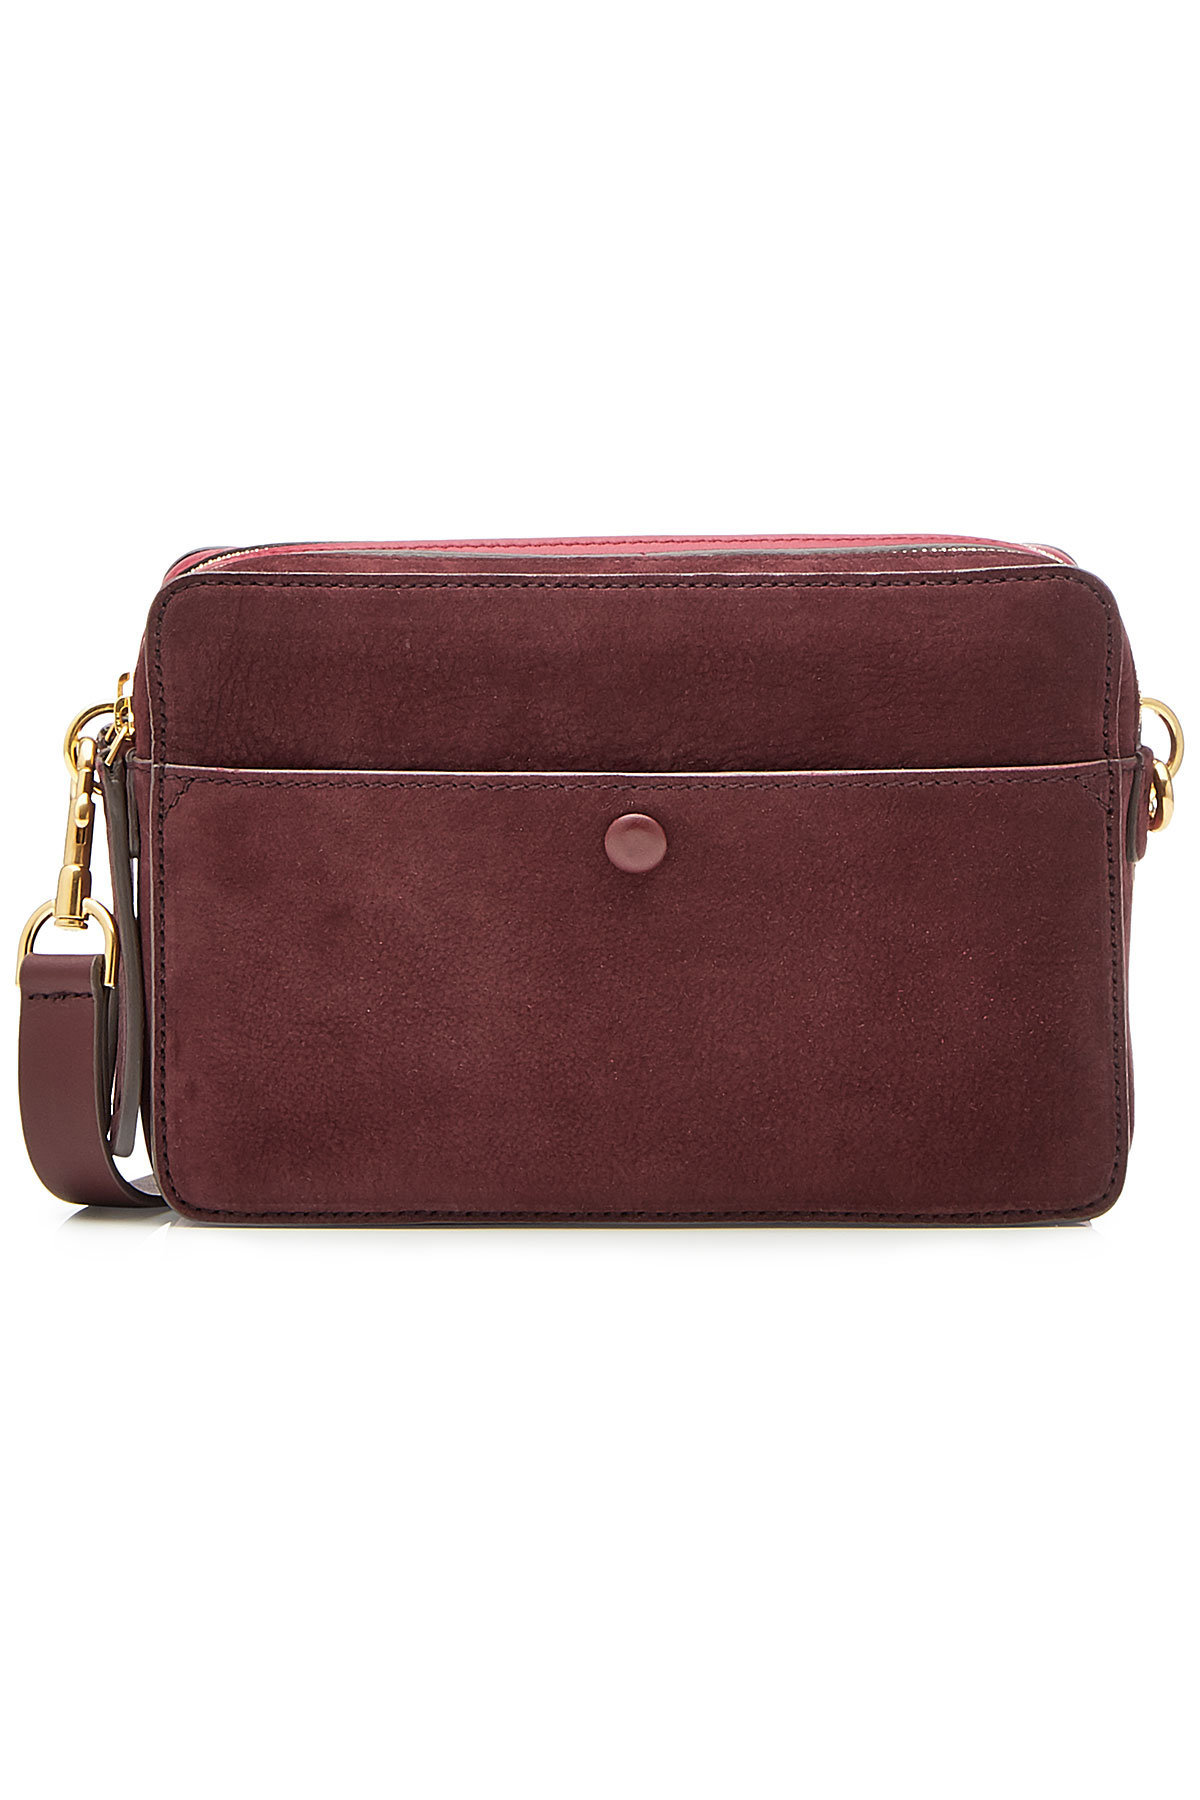 Anya Hindmarch - Double Stack Shoulder Bag in Leather and Suede